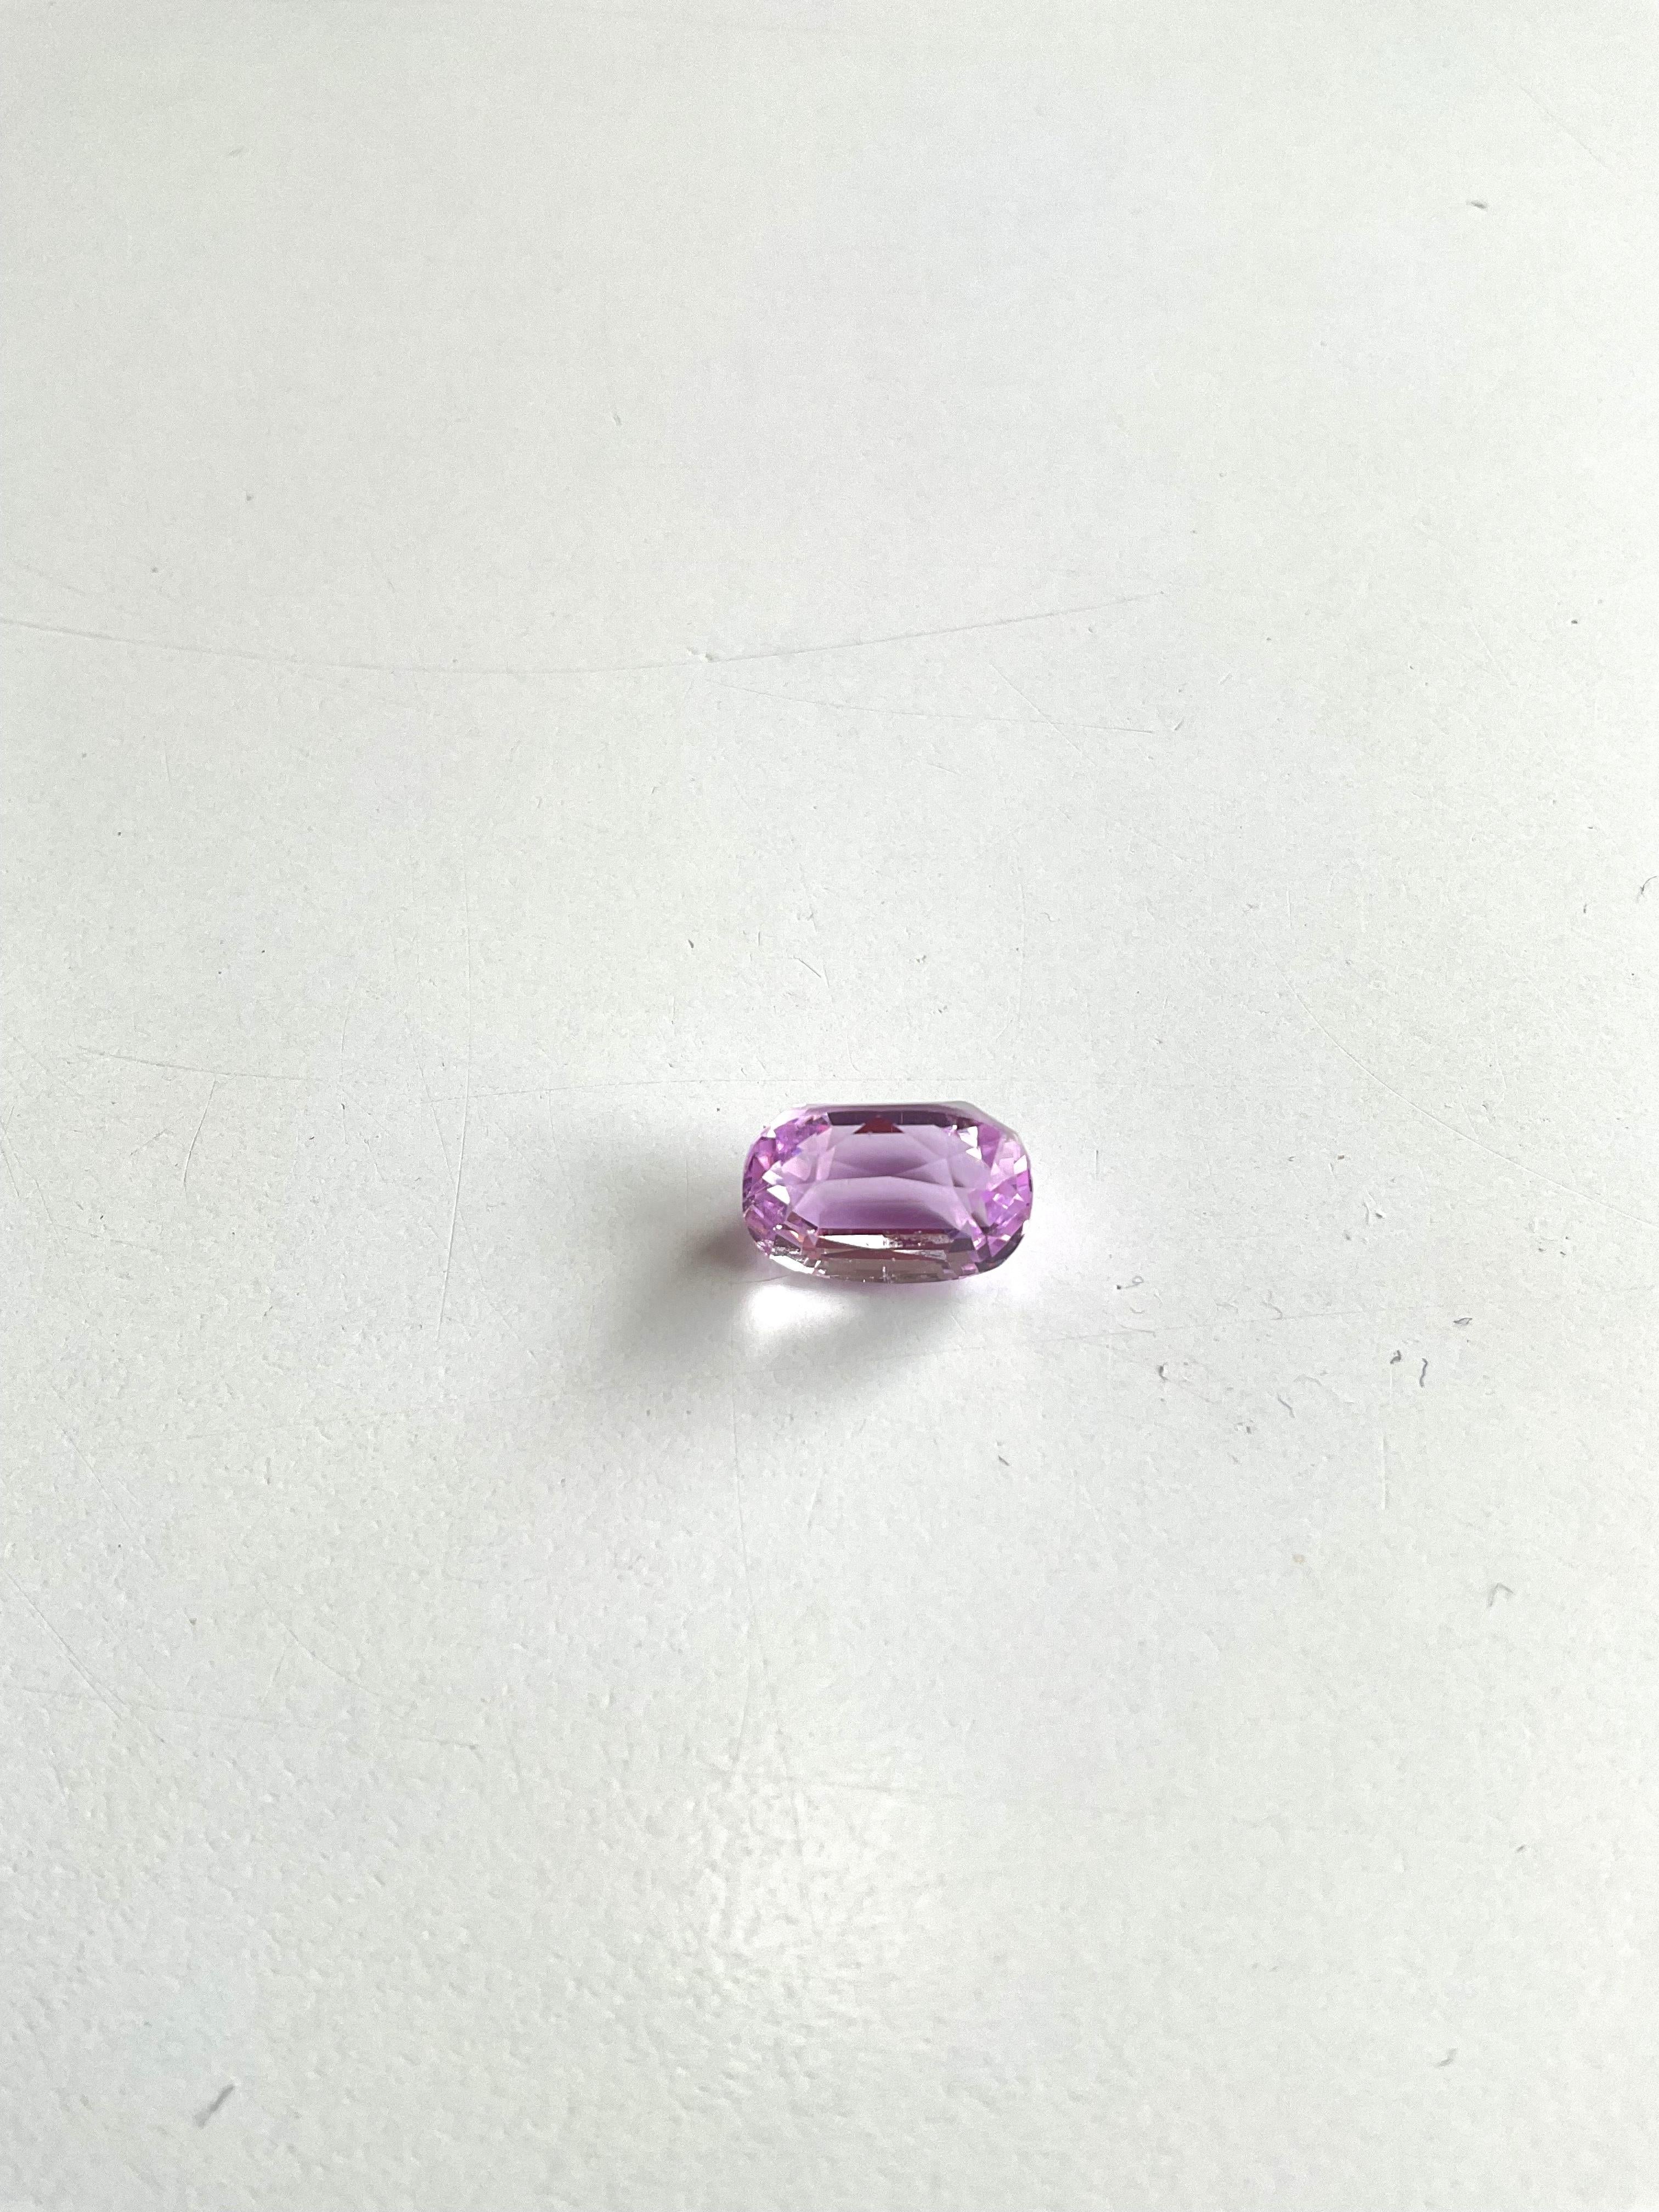 Octagon Cut 6.18 Carats Pink Kunzite Oval Natural Cut Stone For Fine Gem Jewellery For Sale